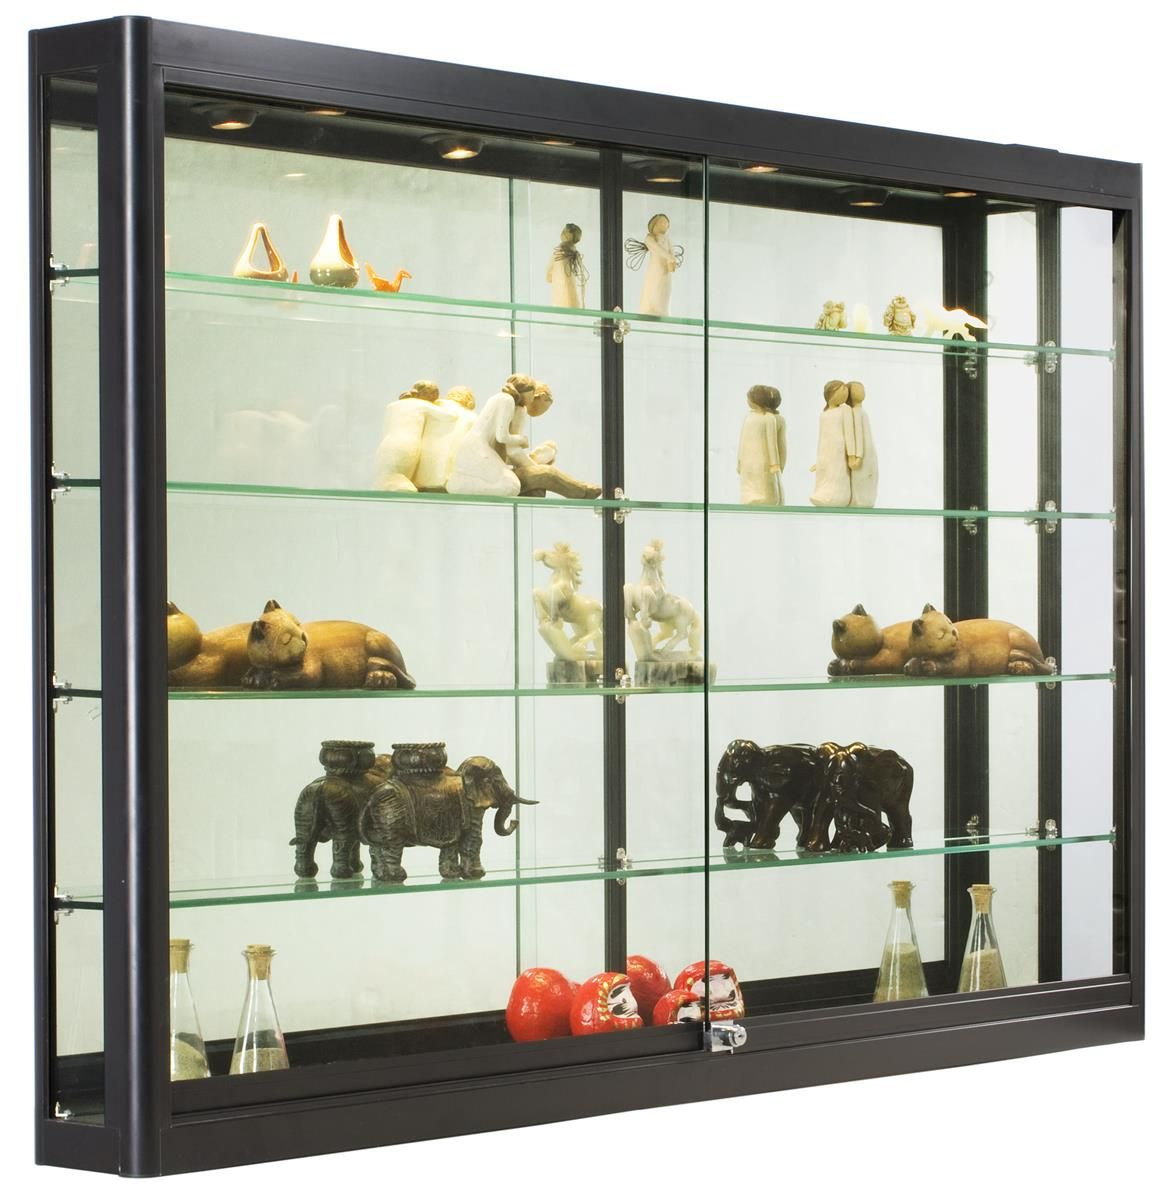 5ft Wall Mounted Display Case W4 Top Halogen Lights Mirror Back regarding dimensions 1172 X 1200